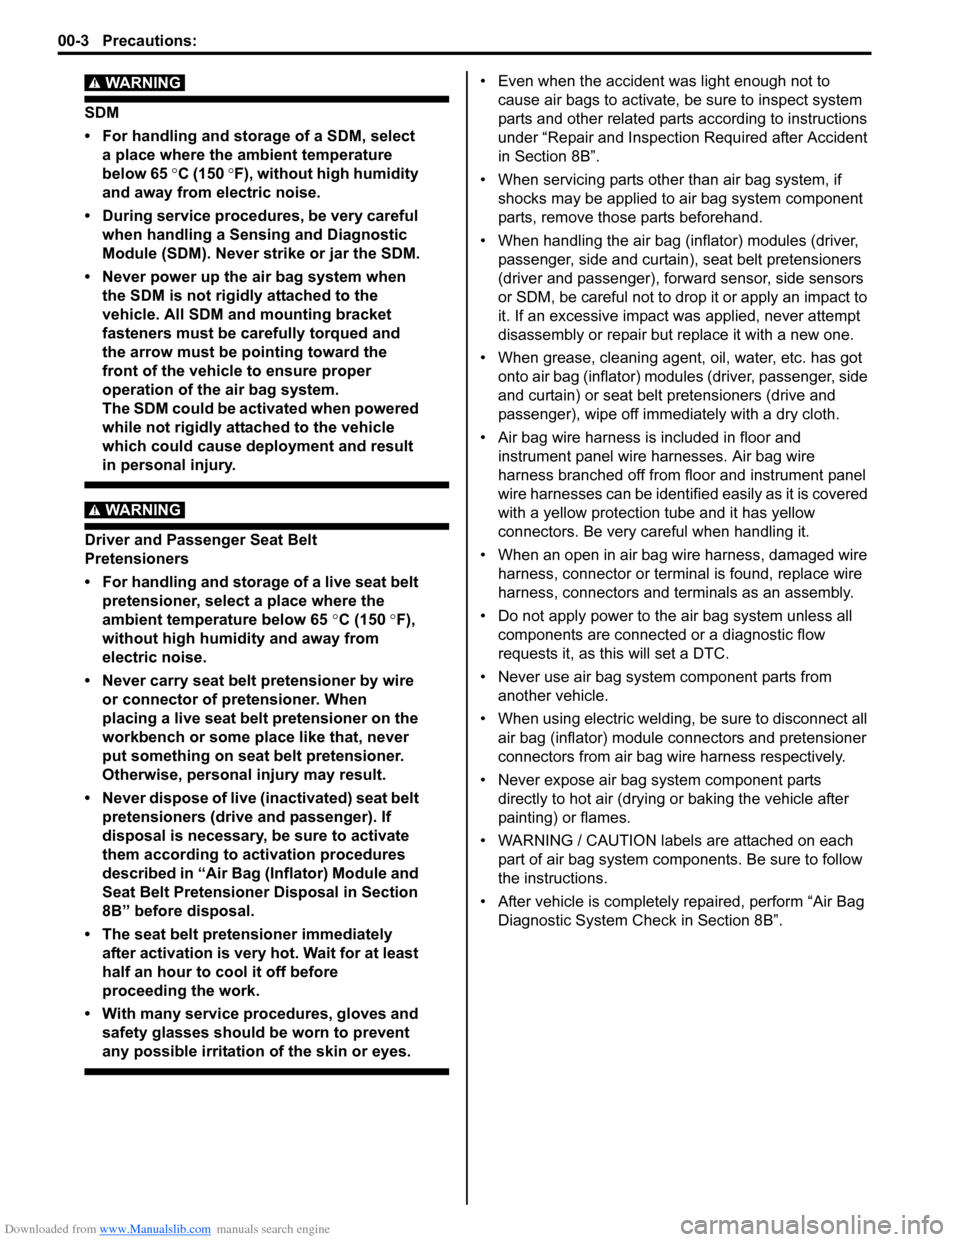 SUZUKI SWIFT 2004 2.G Service Workshop Manual Downloaded from www.Manualslib.com manuals search engine 00-3 Precautions: 
WARNING! 
SDM
• For handling and storage of a SDM, select a place where the ambient temperature 
below 65  °C (150  °F),